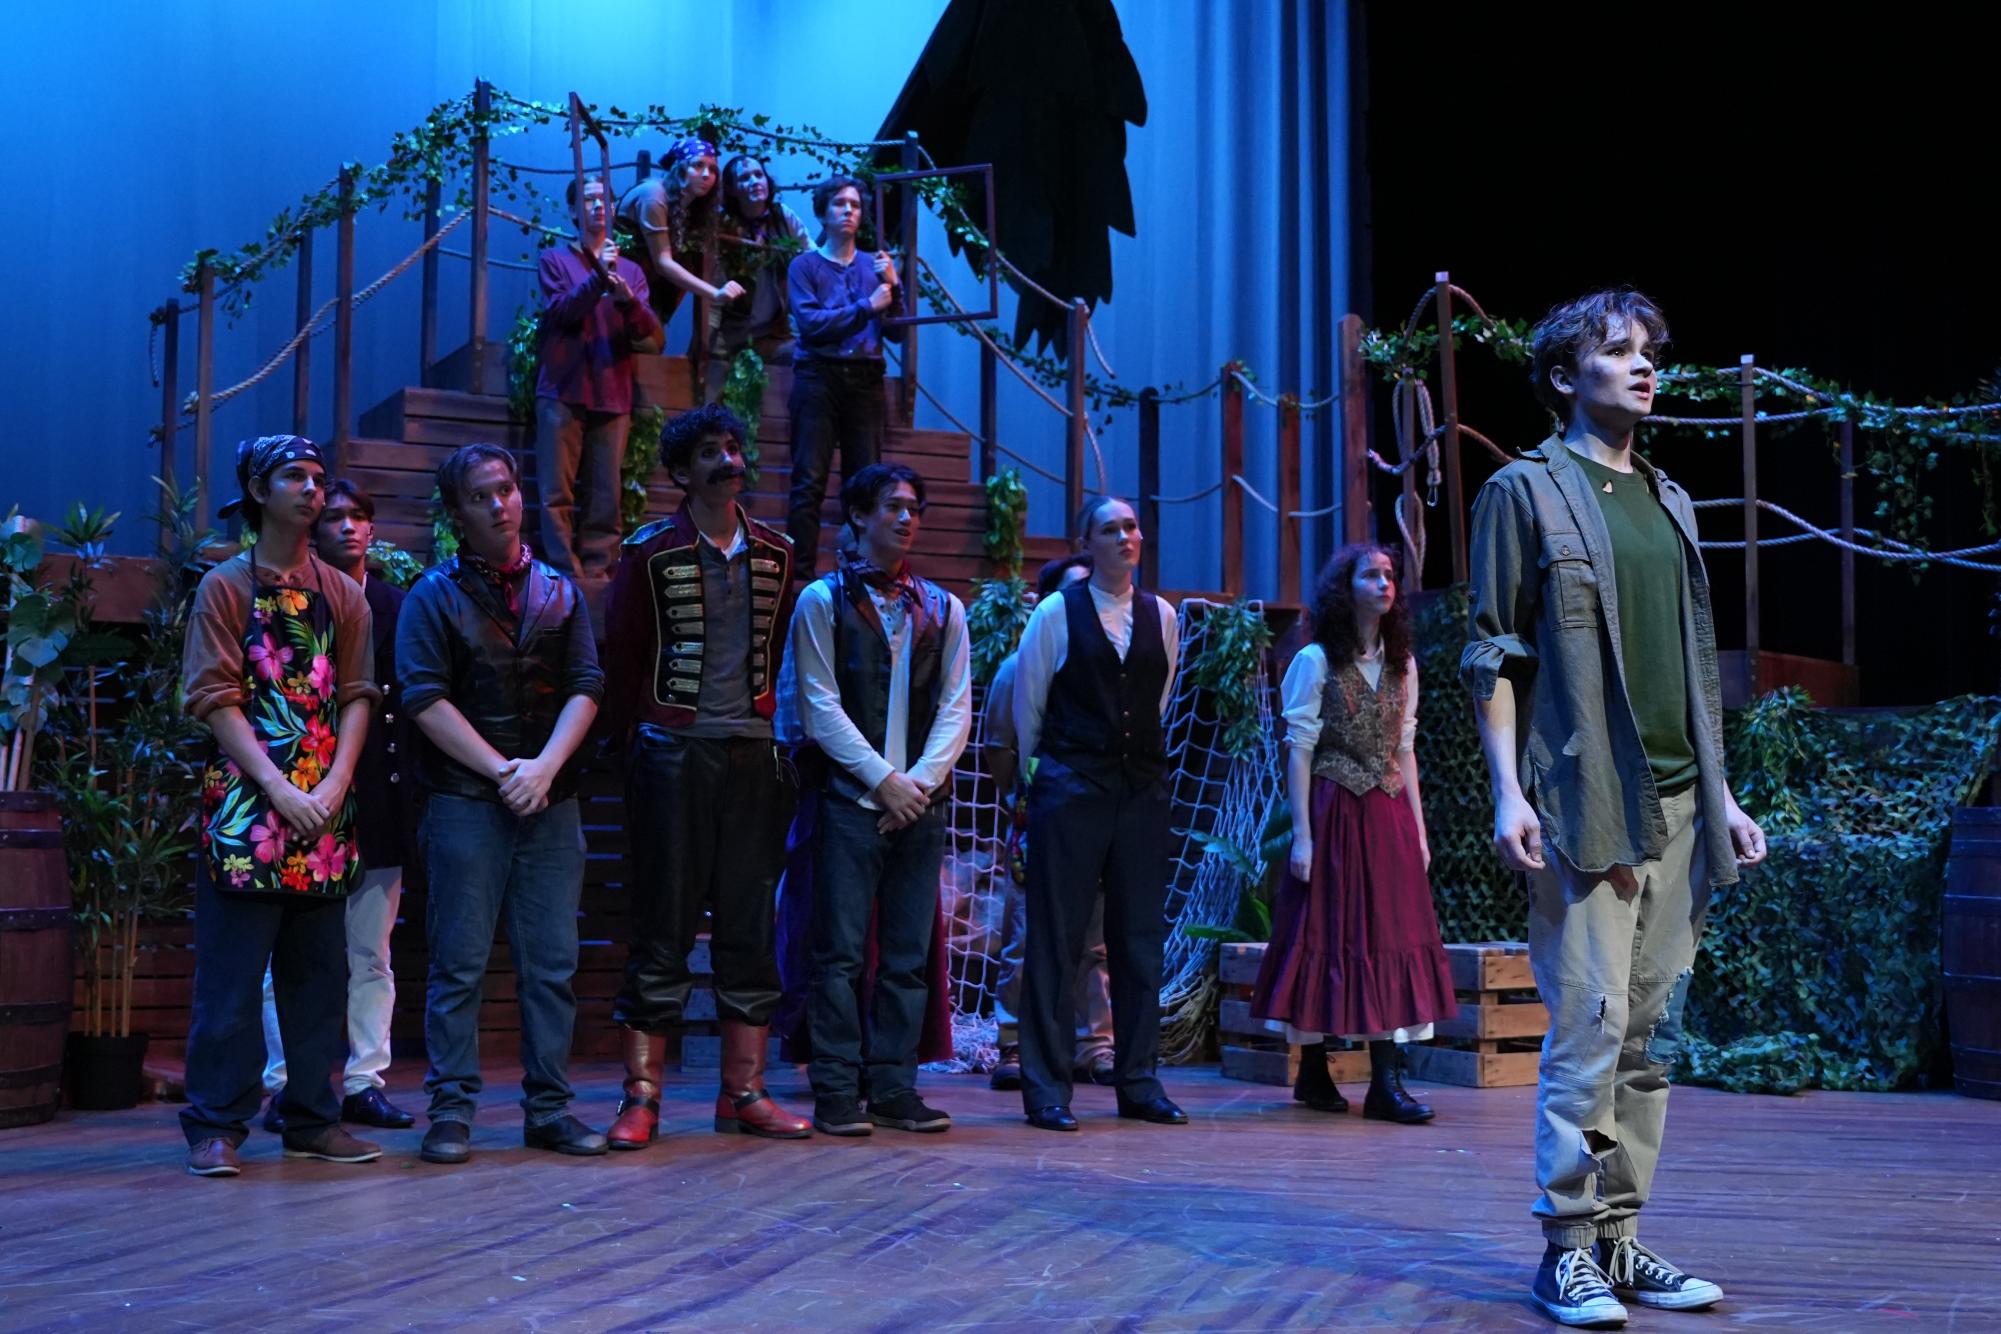 The cast together on stage for the final scene of Peter and the Starcatcher